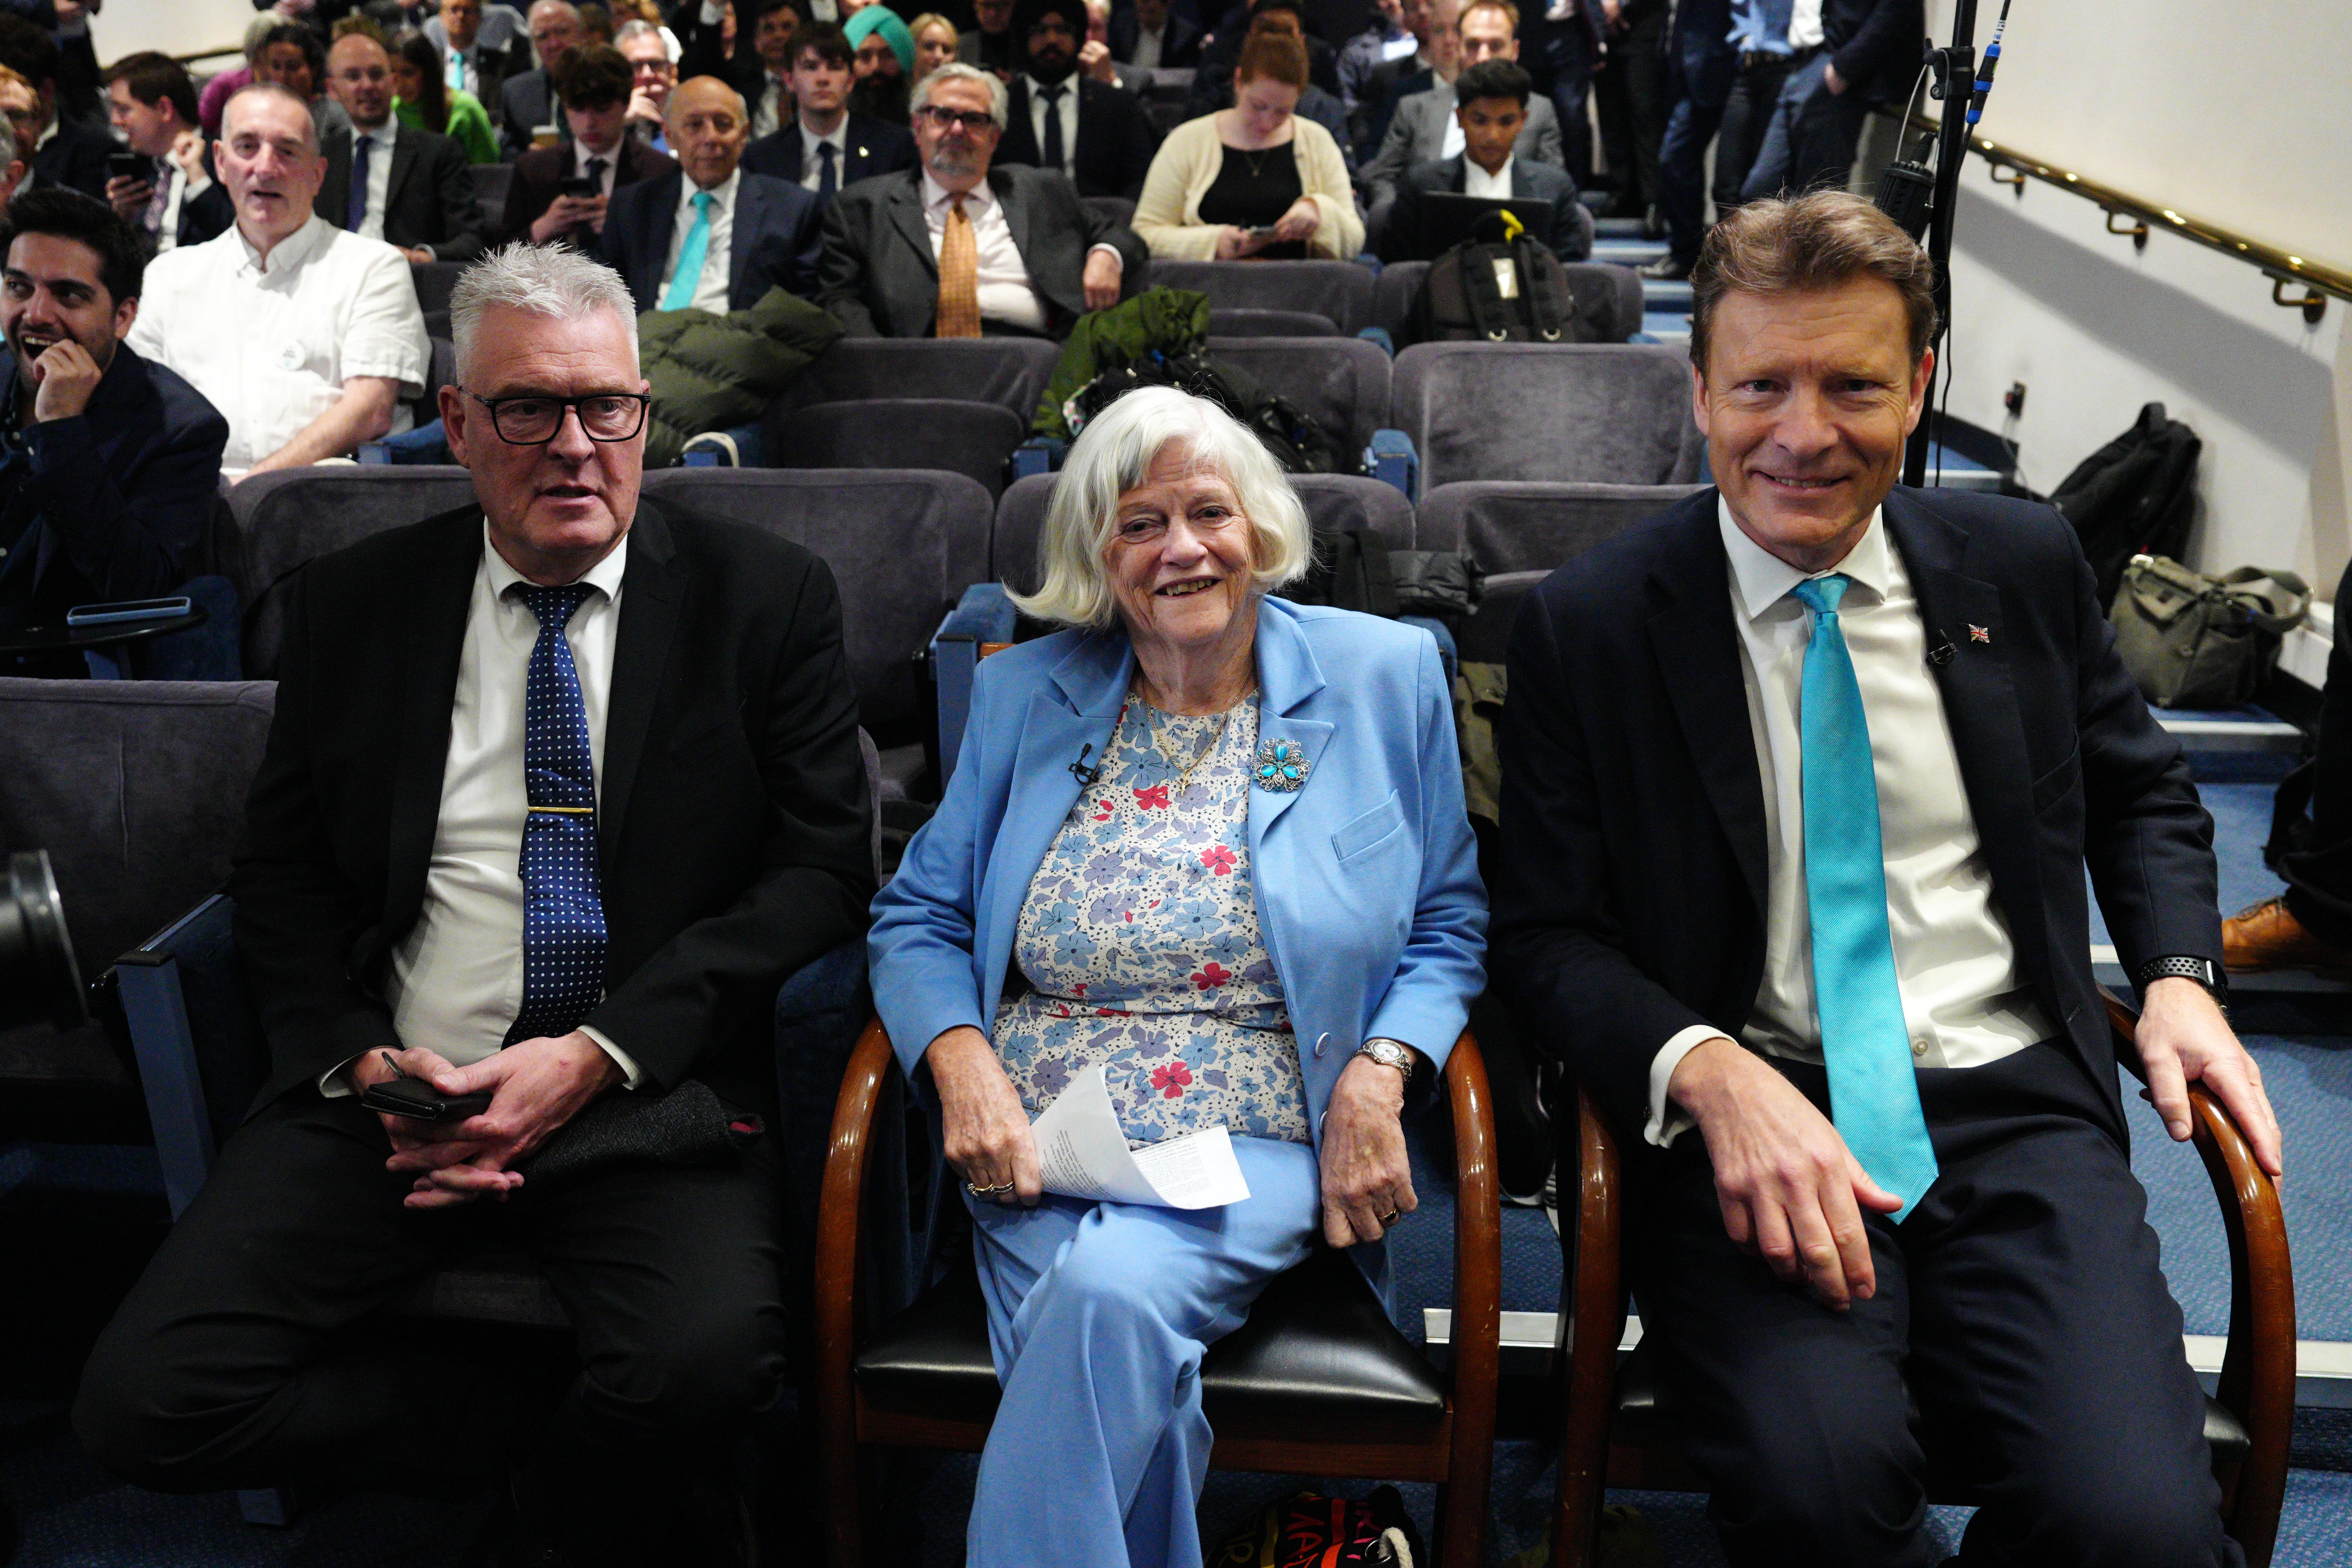 Lee Anderson, former MP Ann Widdecombe, and Reform UK leader Richard Tice at the party election launch on Thursday